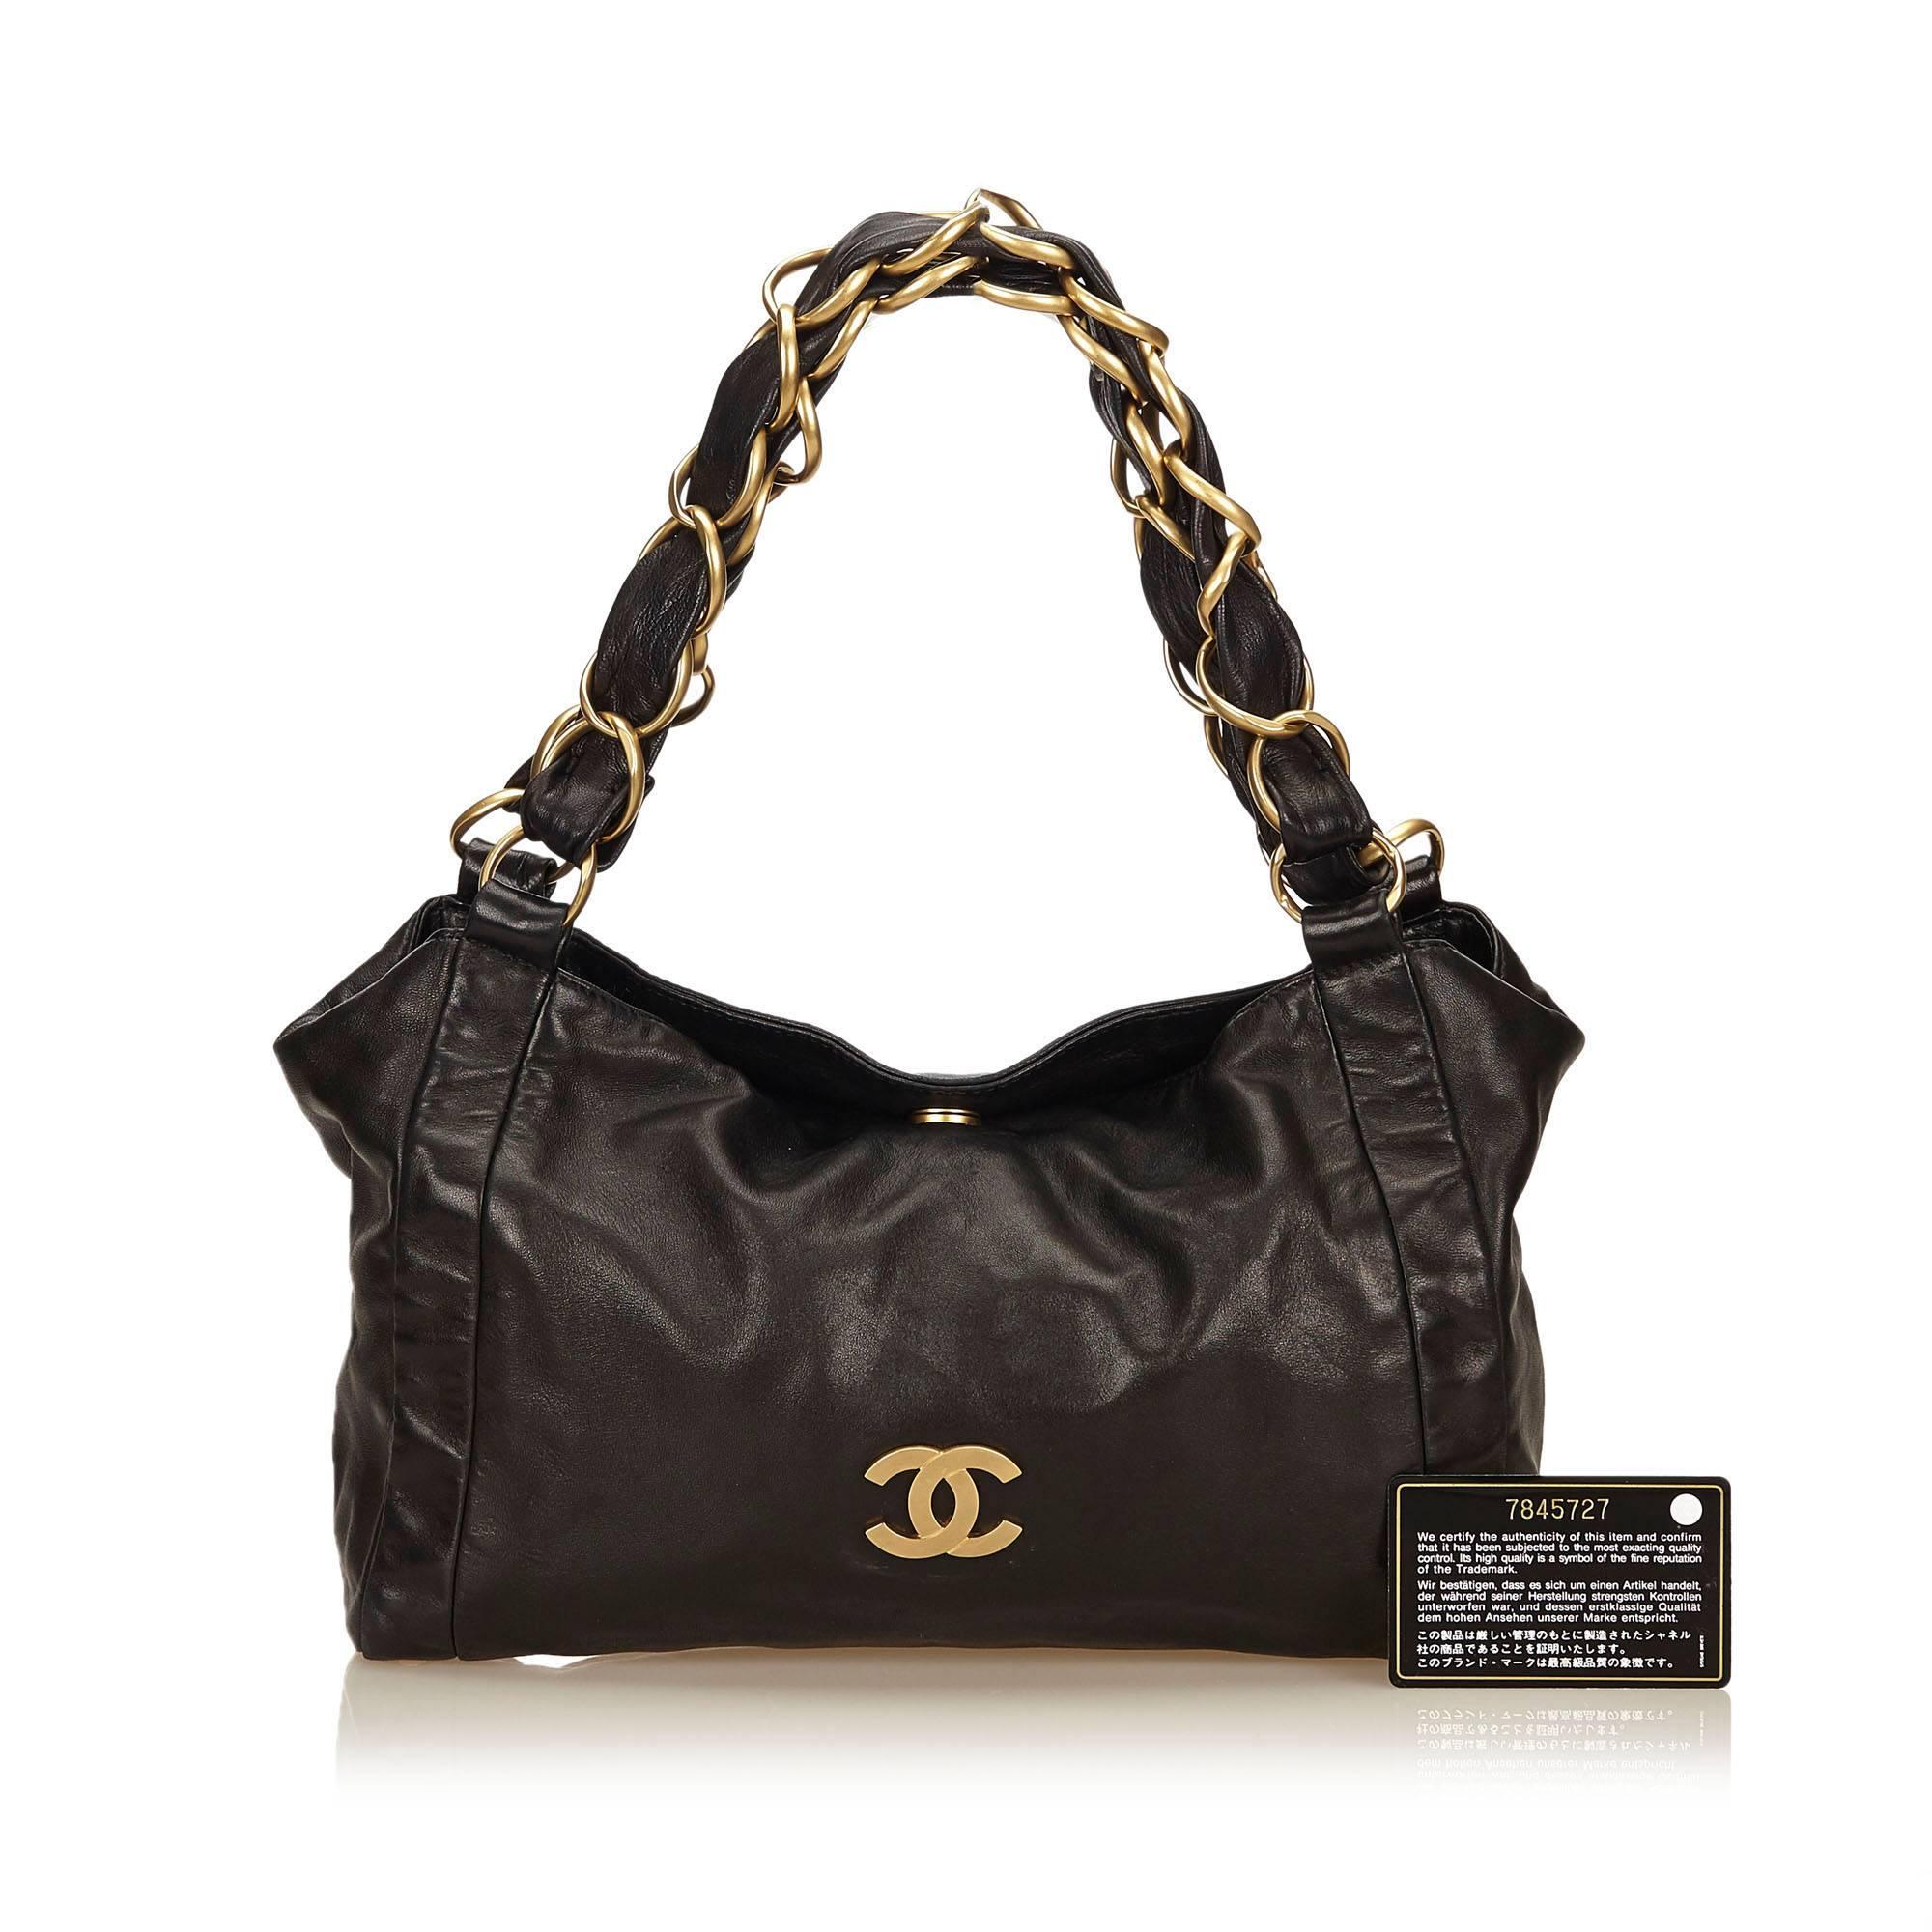 Chanel Black Leather Fold Top Gold Chain Strap Tote Bag 2